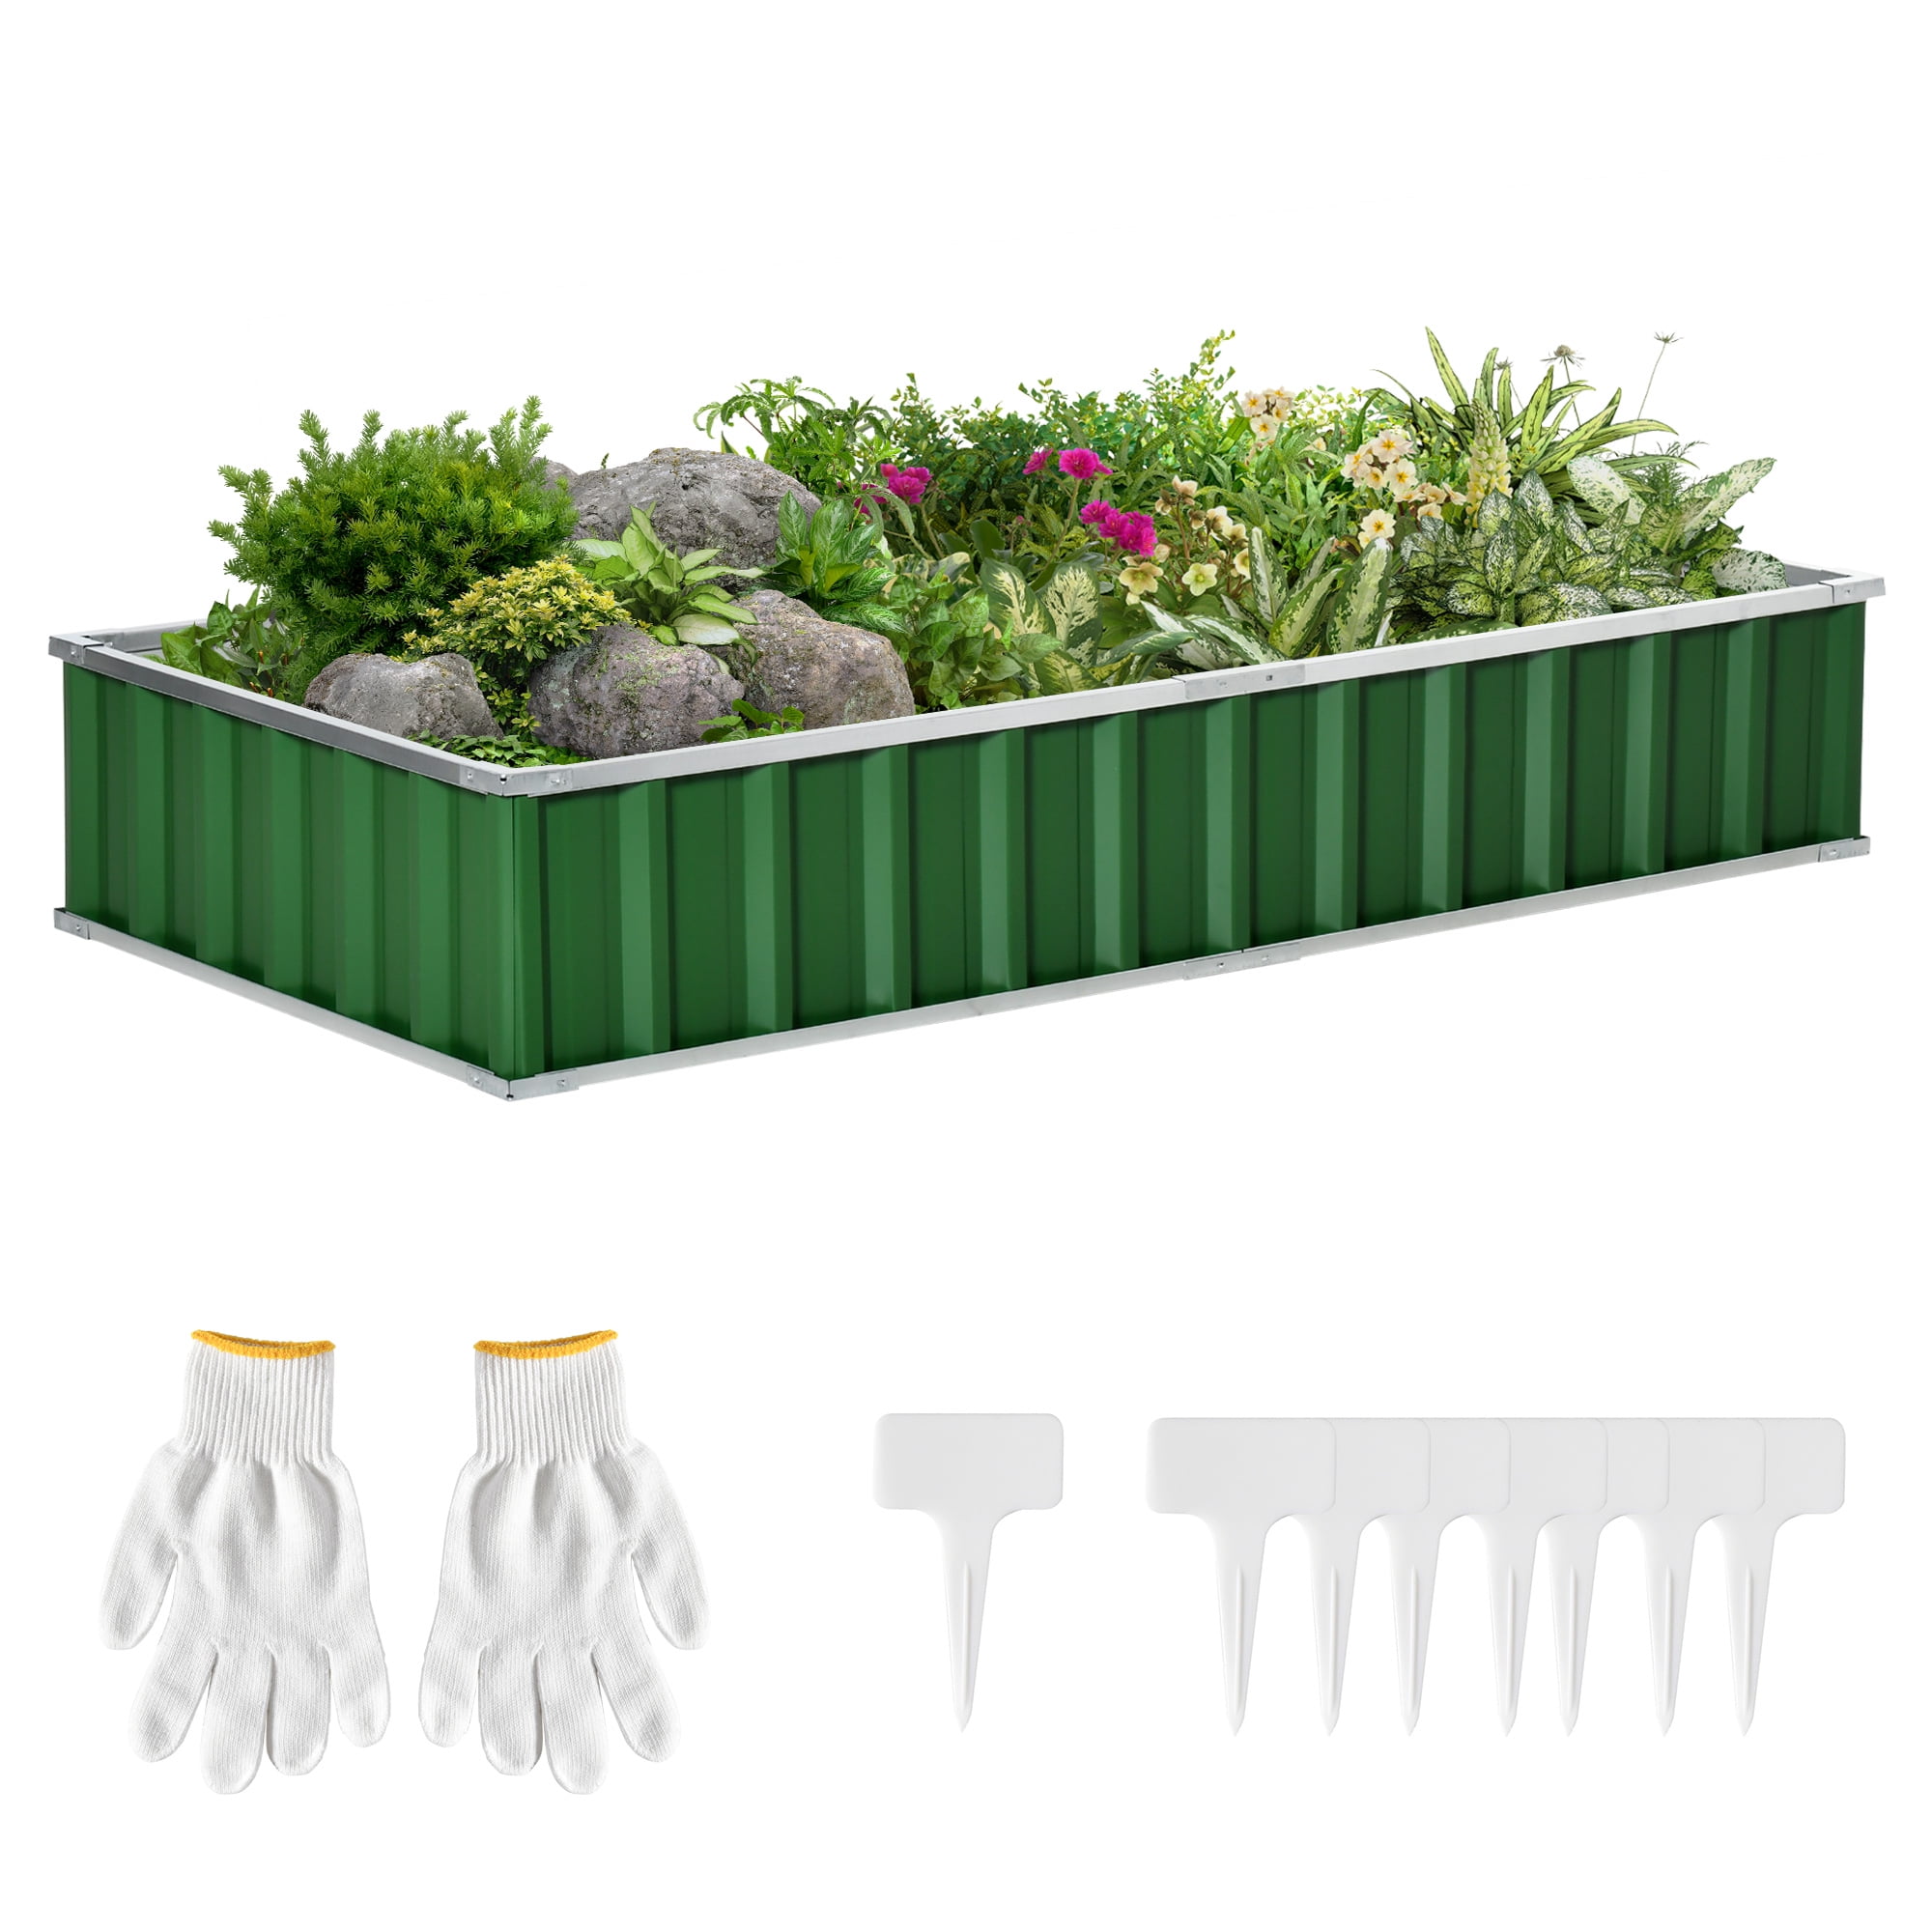 Outsunny 69'' x 36'' Galvanized Raised Garden Bed, DIY Large Planter for Outdoor Plants, No Bottom w/ A Pairs of Glove for Backyard, Patio to Vegetables, Herbs, and Green -